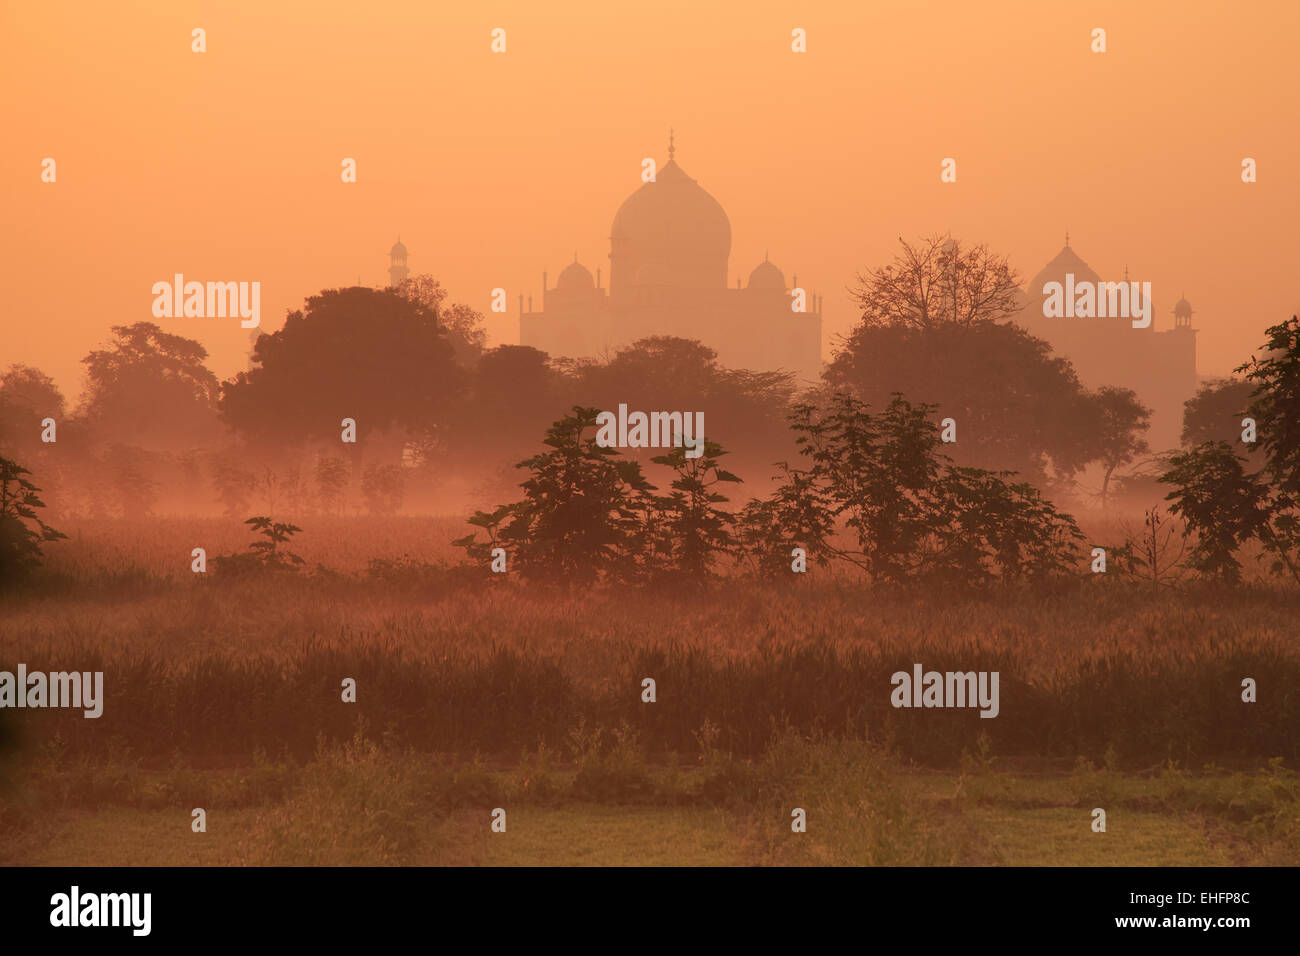 A view of the Taj Mahal, the most visited location in the world. Stock Photo